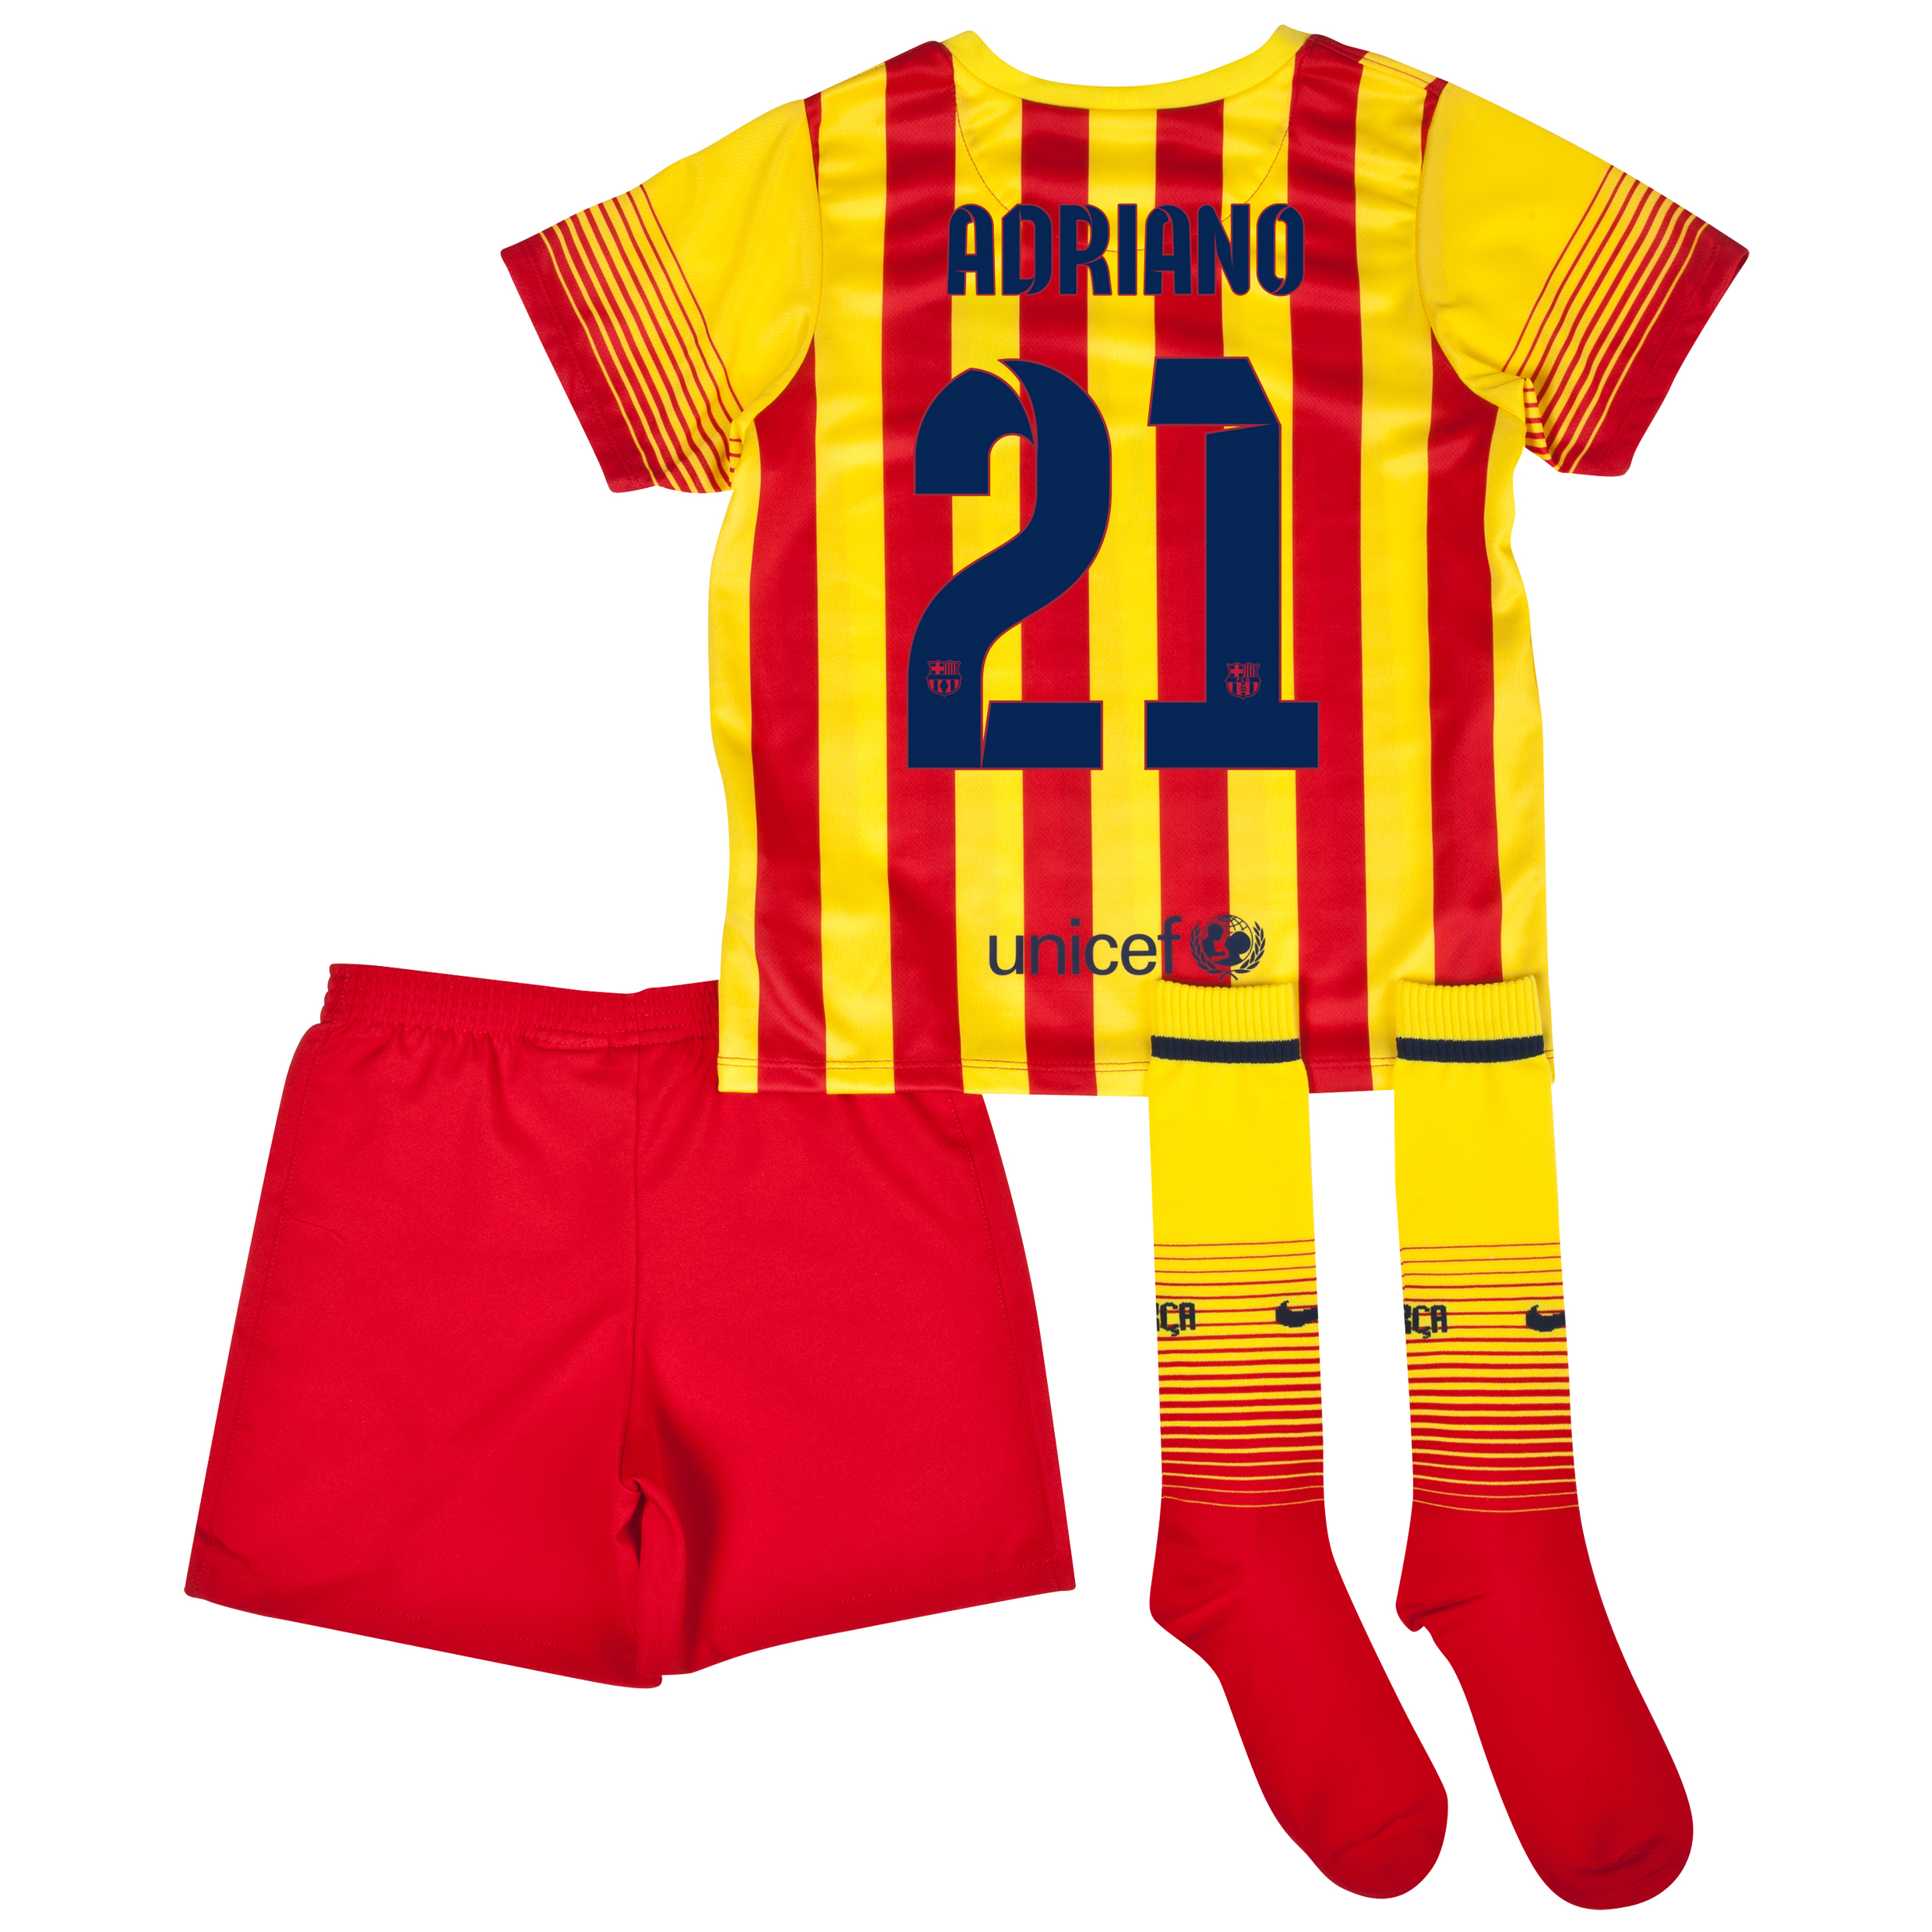 Barcelona Away Kit 2013/14 - Little Boys with Adriano 21 printing